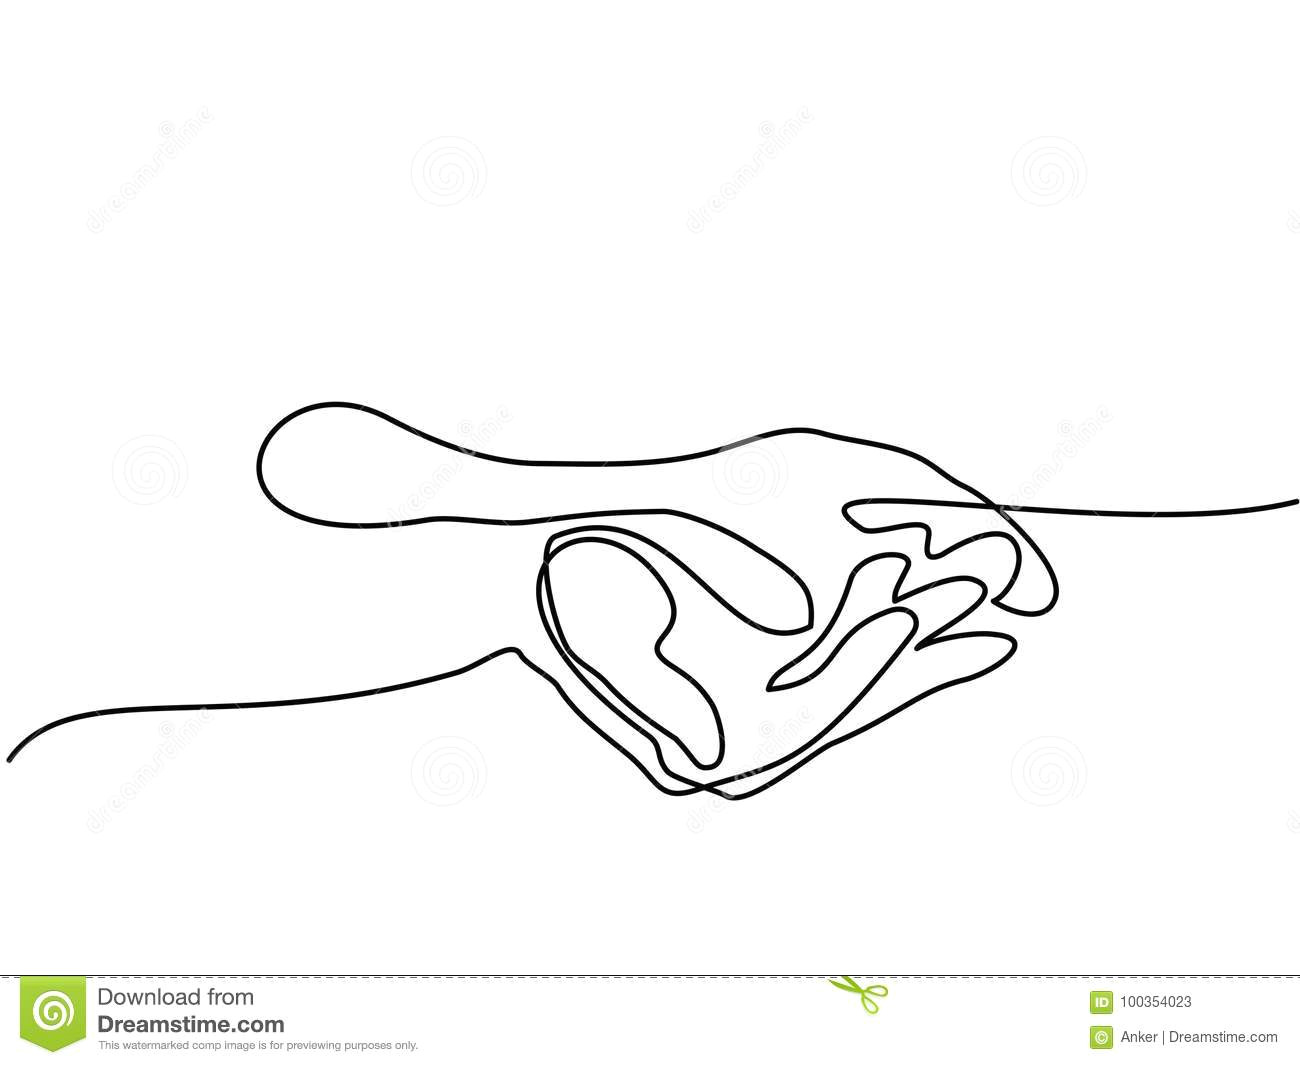 Drawing Hands with Lines Hands Palms together Stock Vector Illustration Of Single 100354023